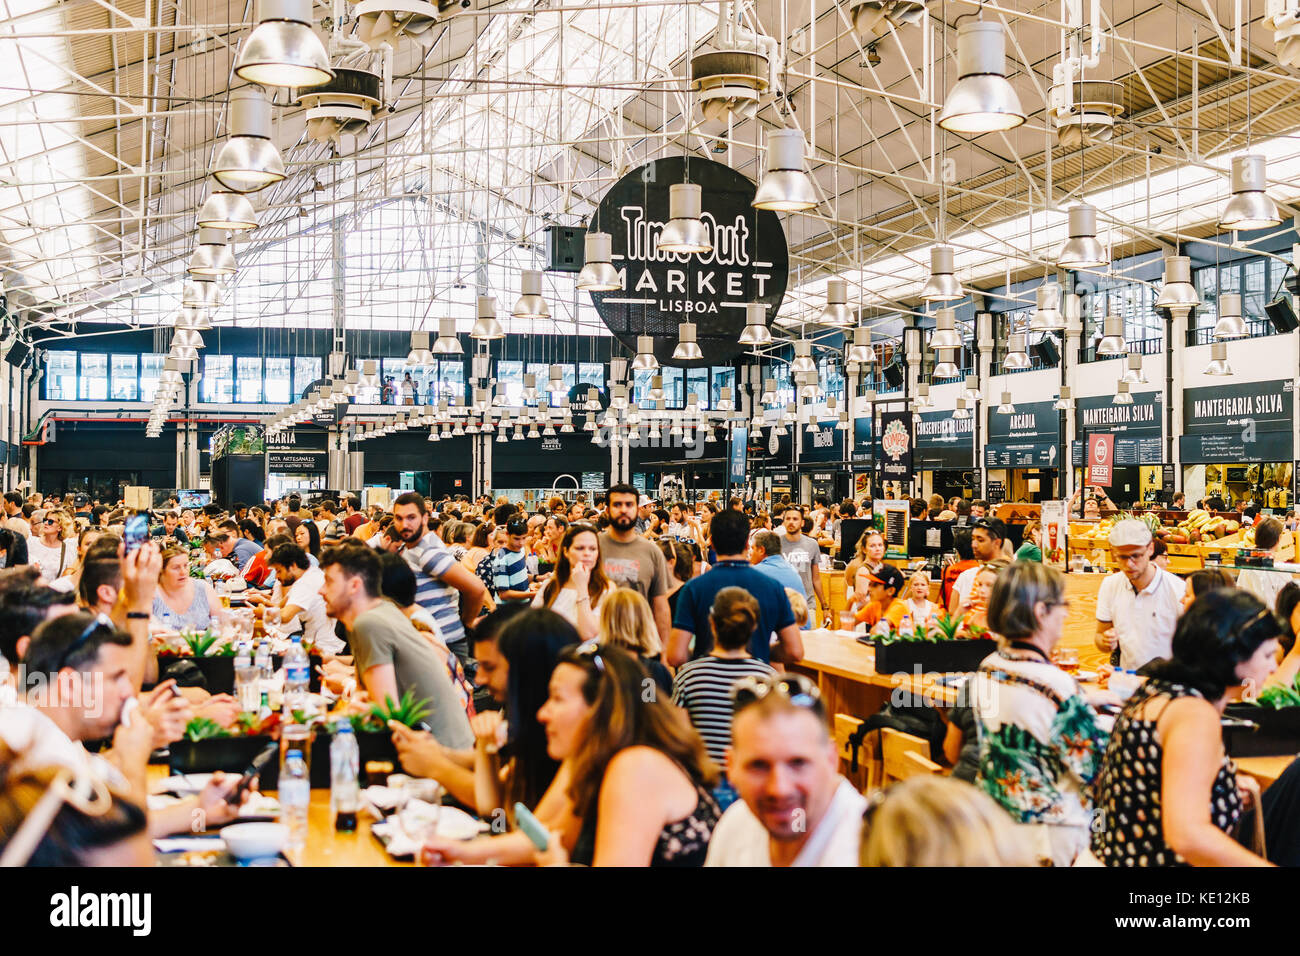 LISBON, PORTUGAL - AUGUST 12, 2017: Time Out Market is a food hall located in Mercado da Ribeira at Cais do Sodre in Lisbon and is a major touristic a Stock Photo